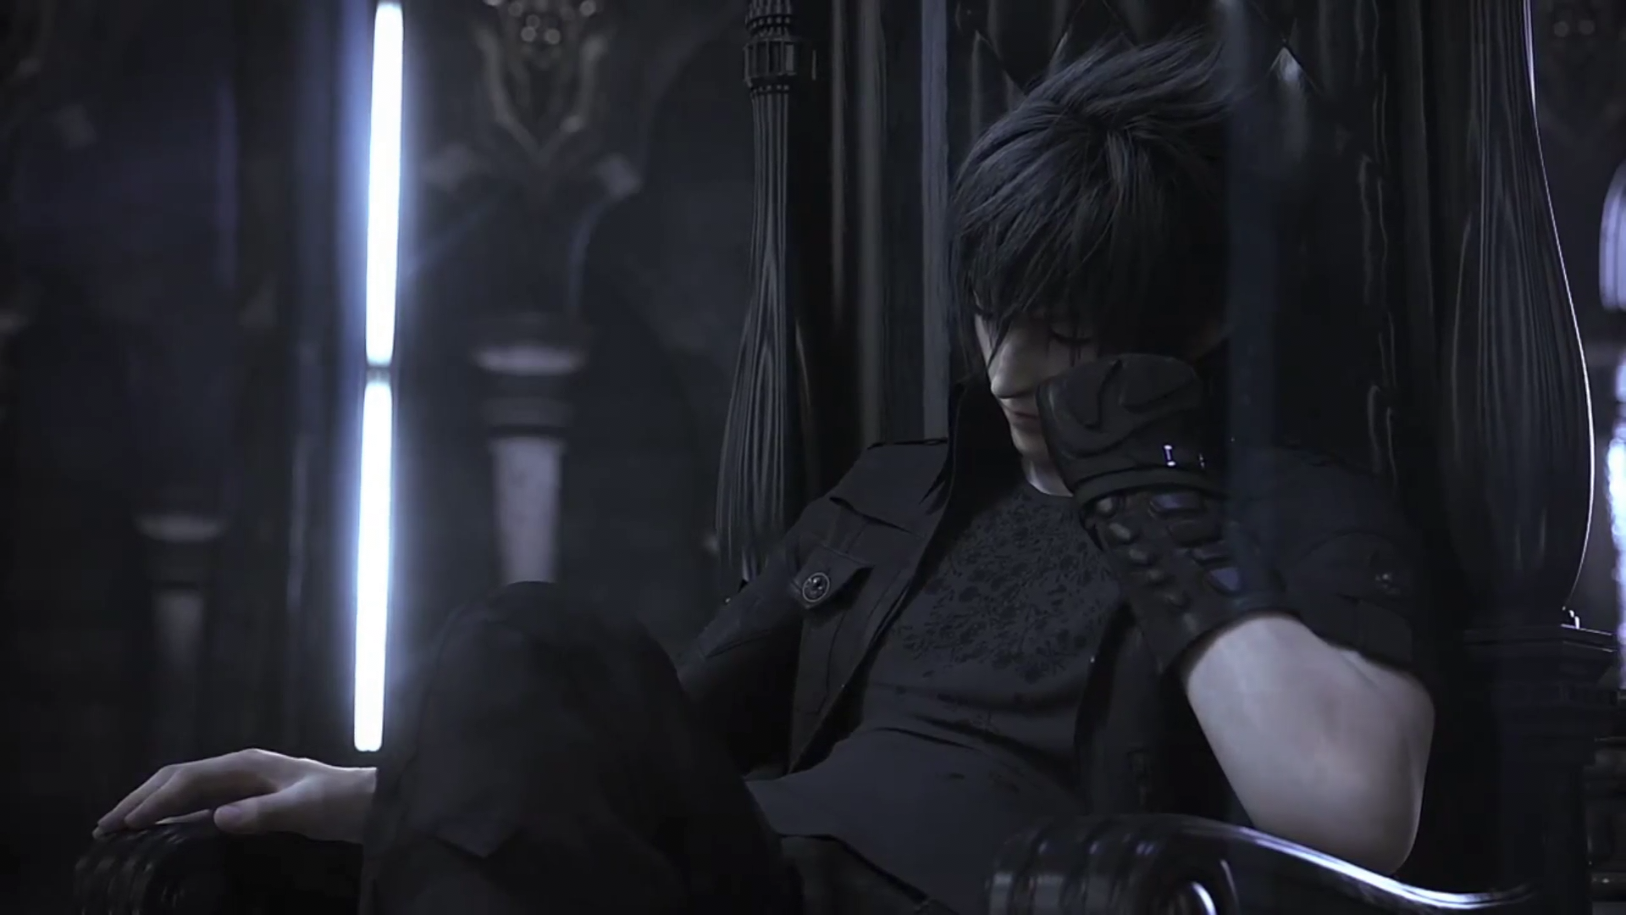 Noctis from “Final Fantasy XV” Could Appear in New “Dissidia” - Not Until His Game Releases First